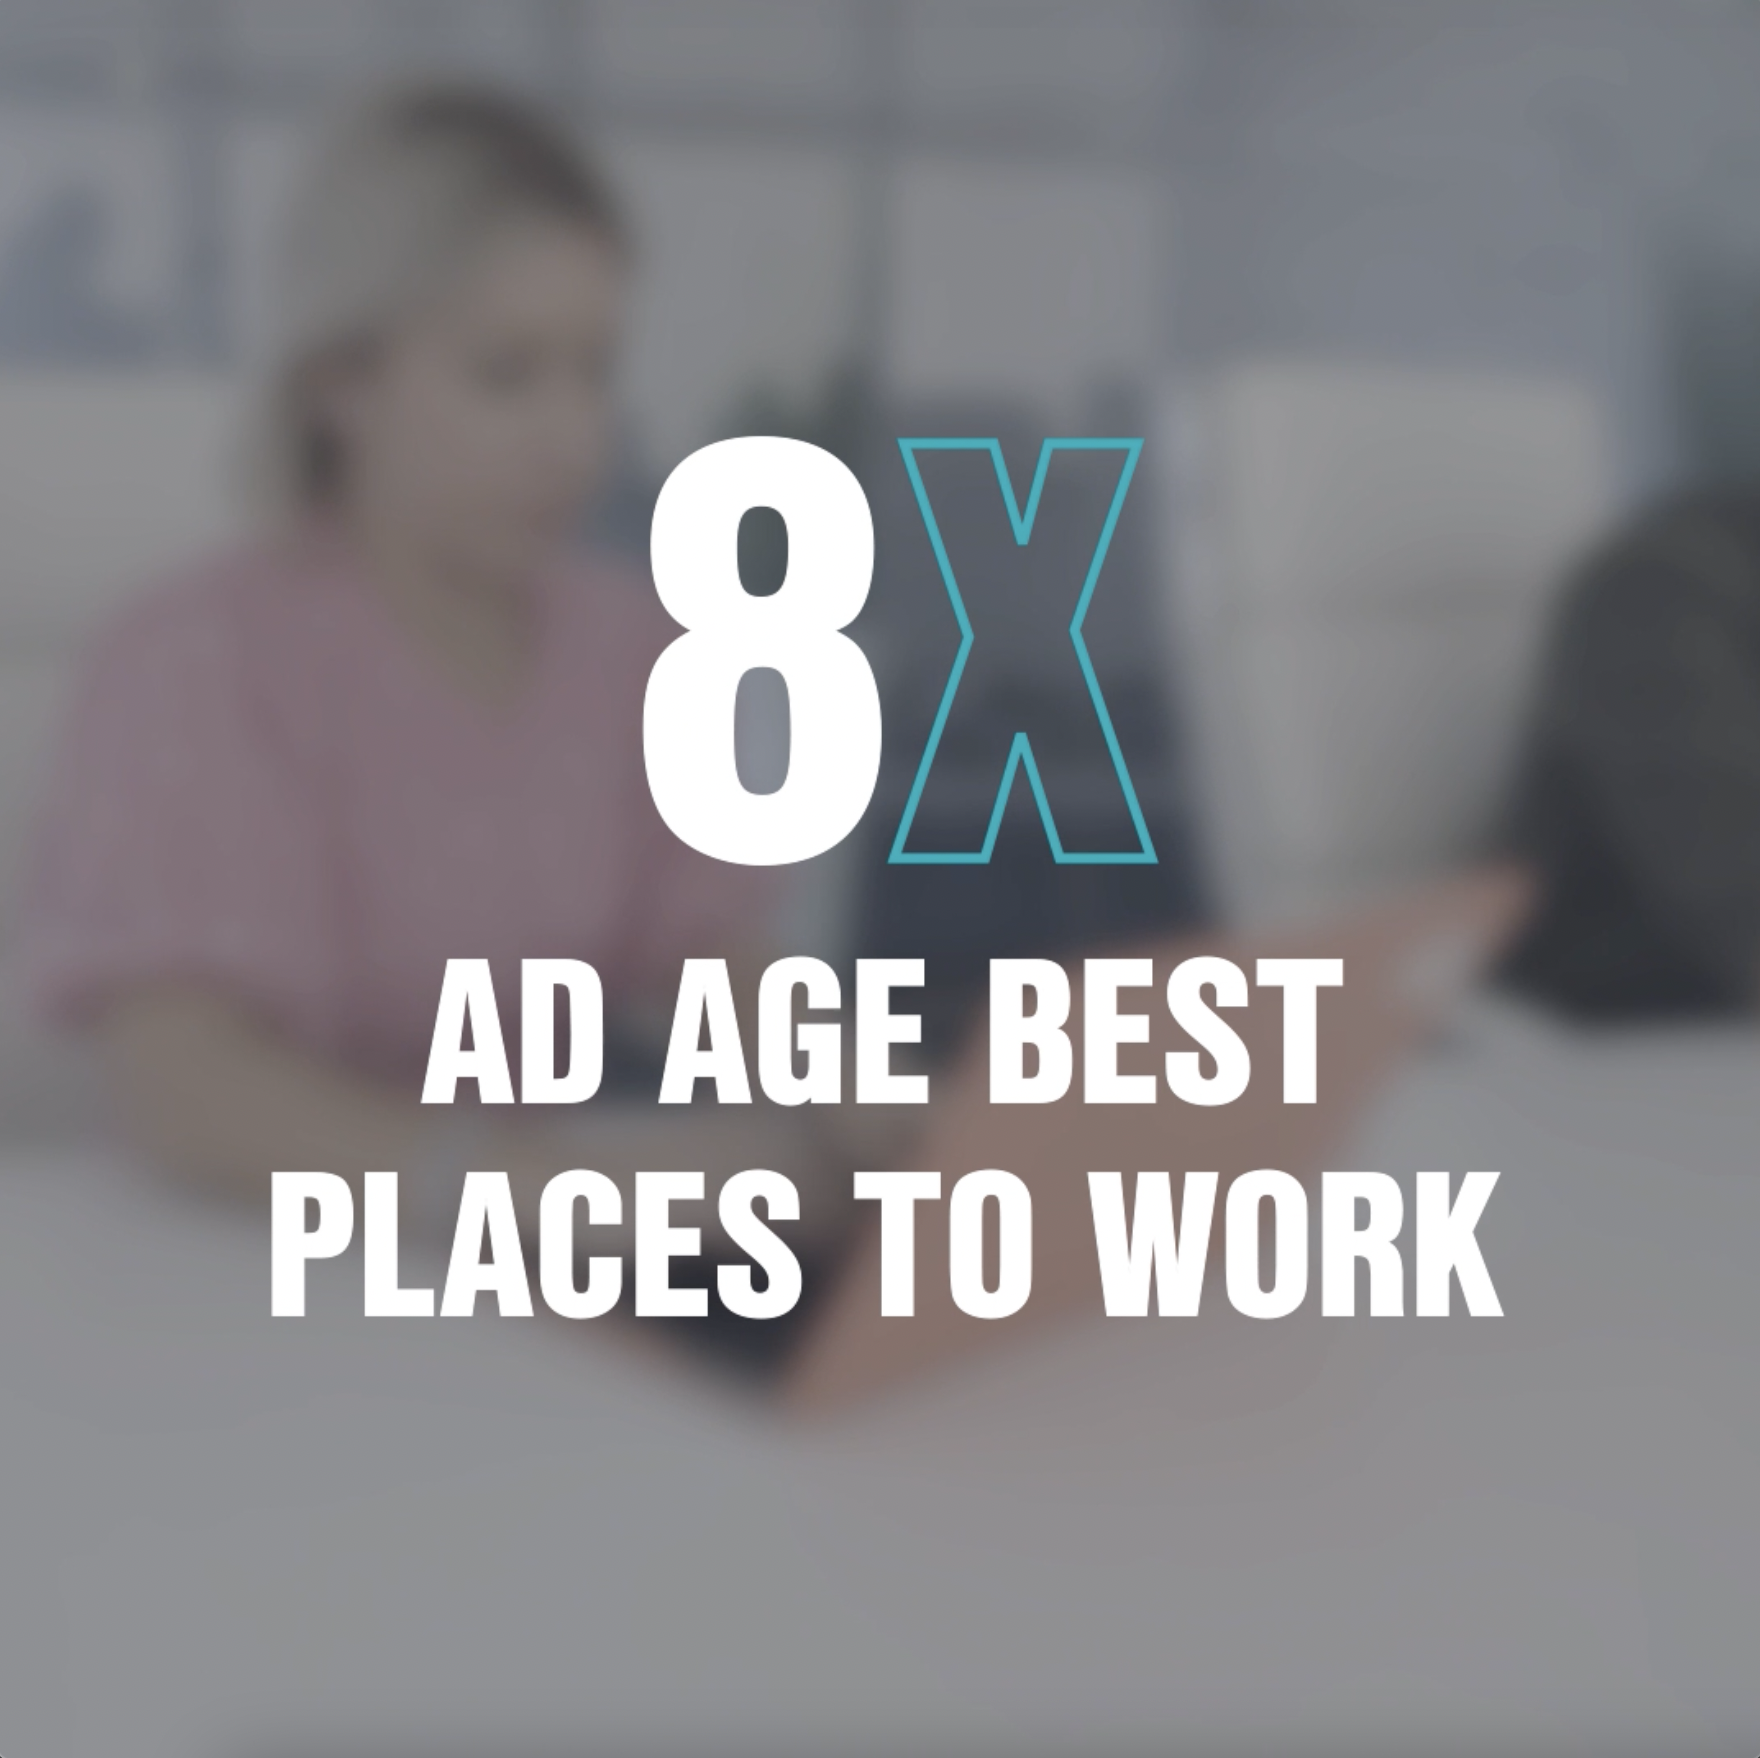 PMG Named Ad Age Best Places to Work 8th Consecutive Year